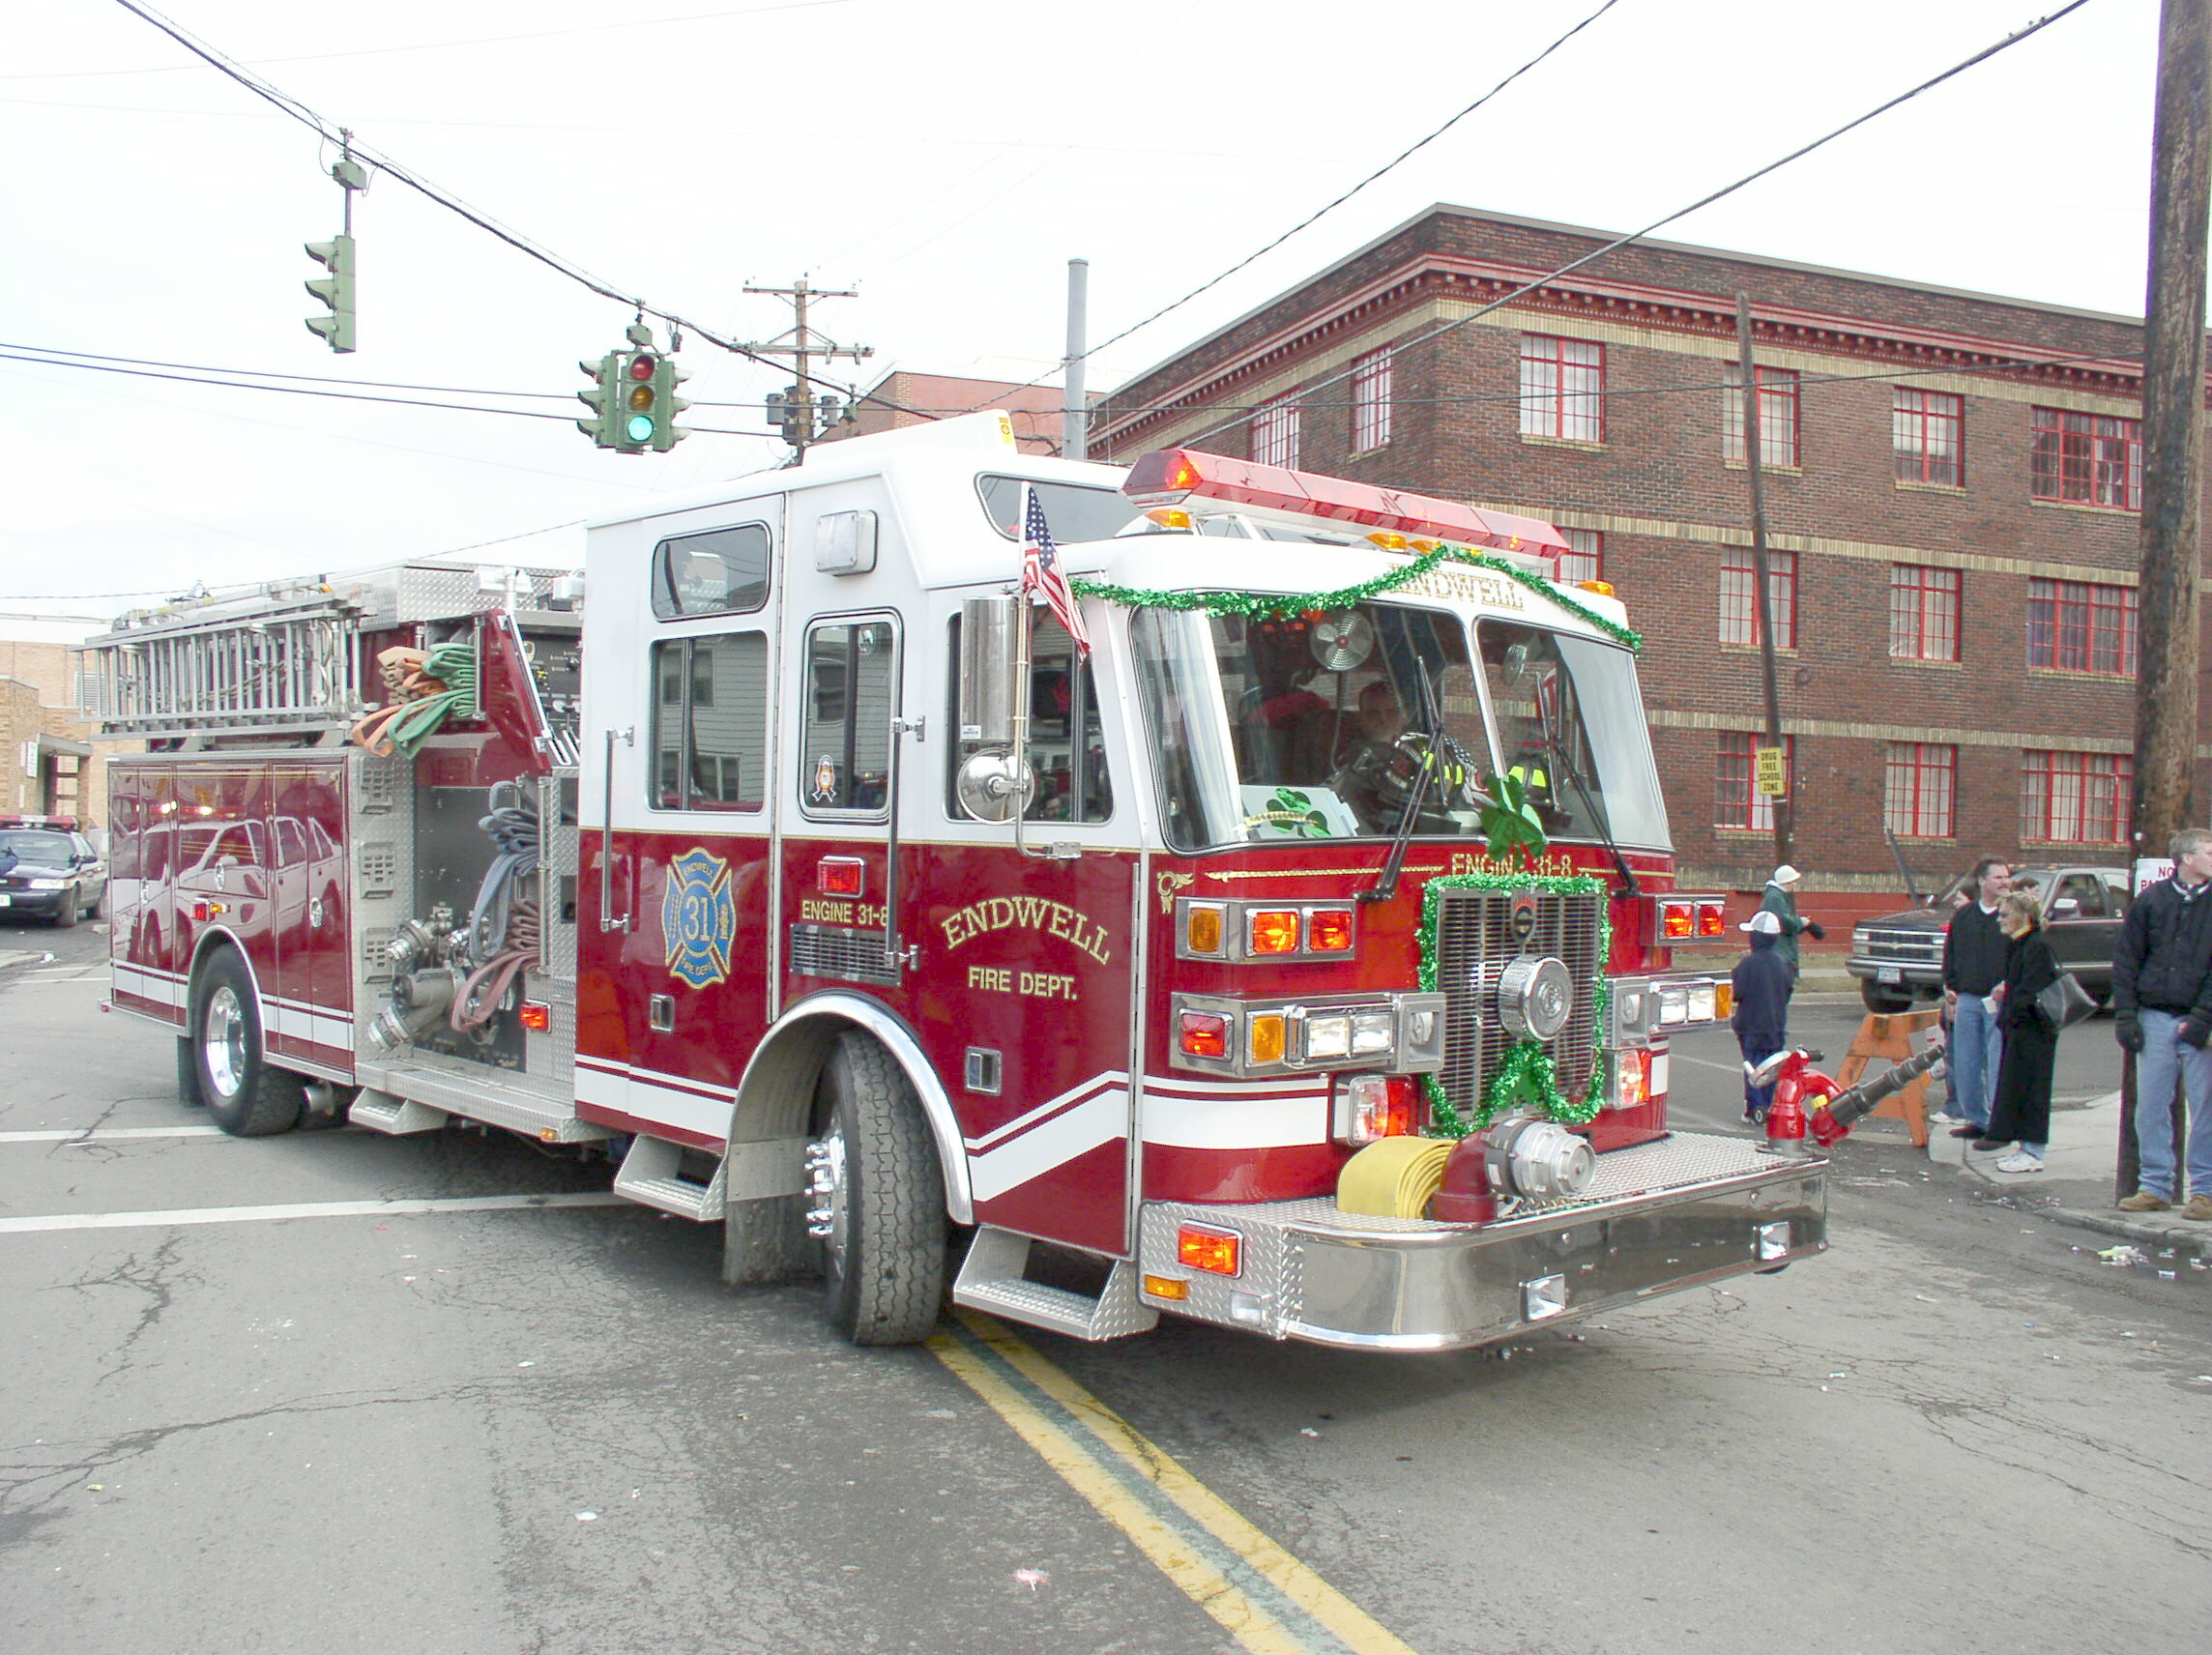 03-06-04  Other - St Patricks Day Parade